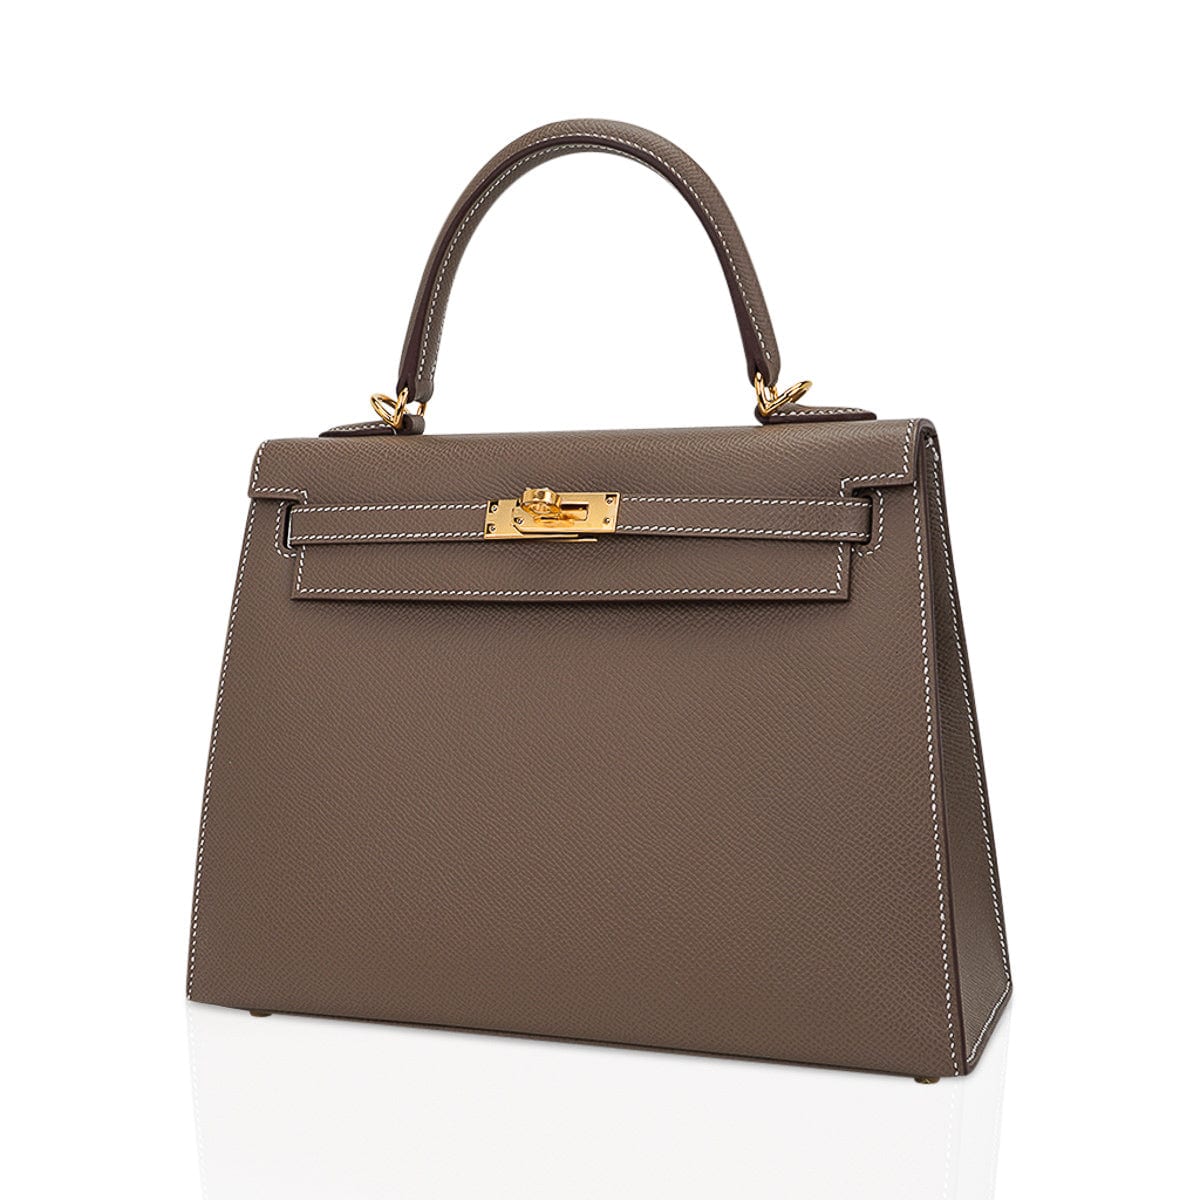 Hermes Kelly Tricolore bag 25 Sellier Etoupe grey/Alezan/Biscuit